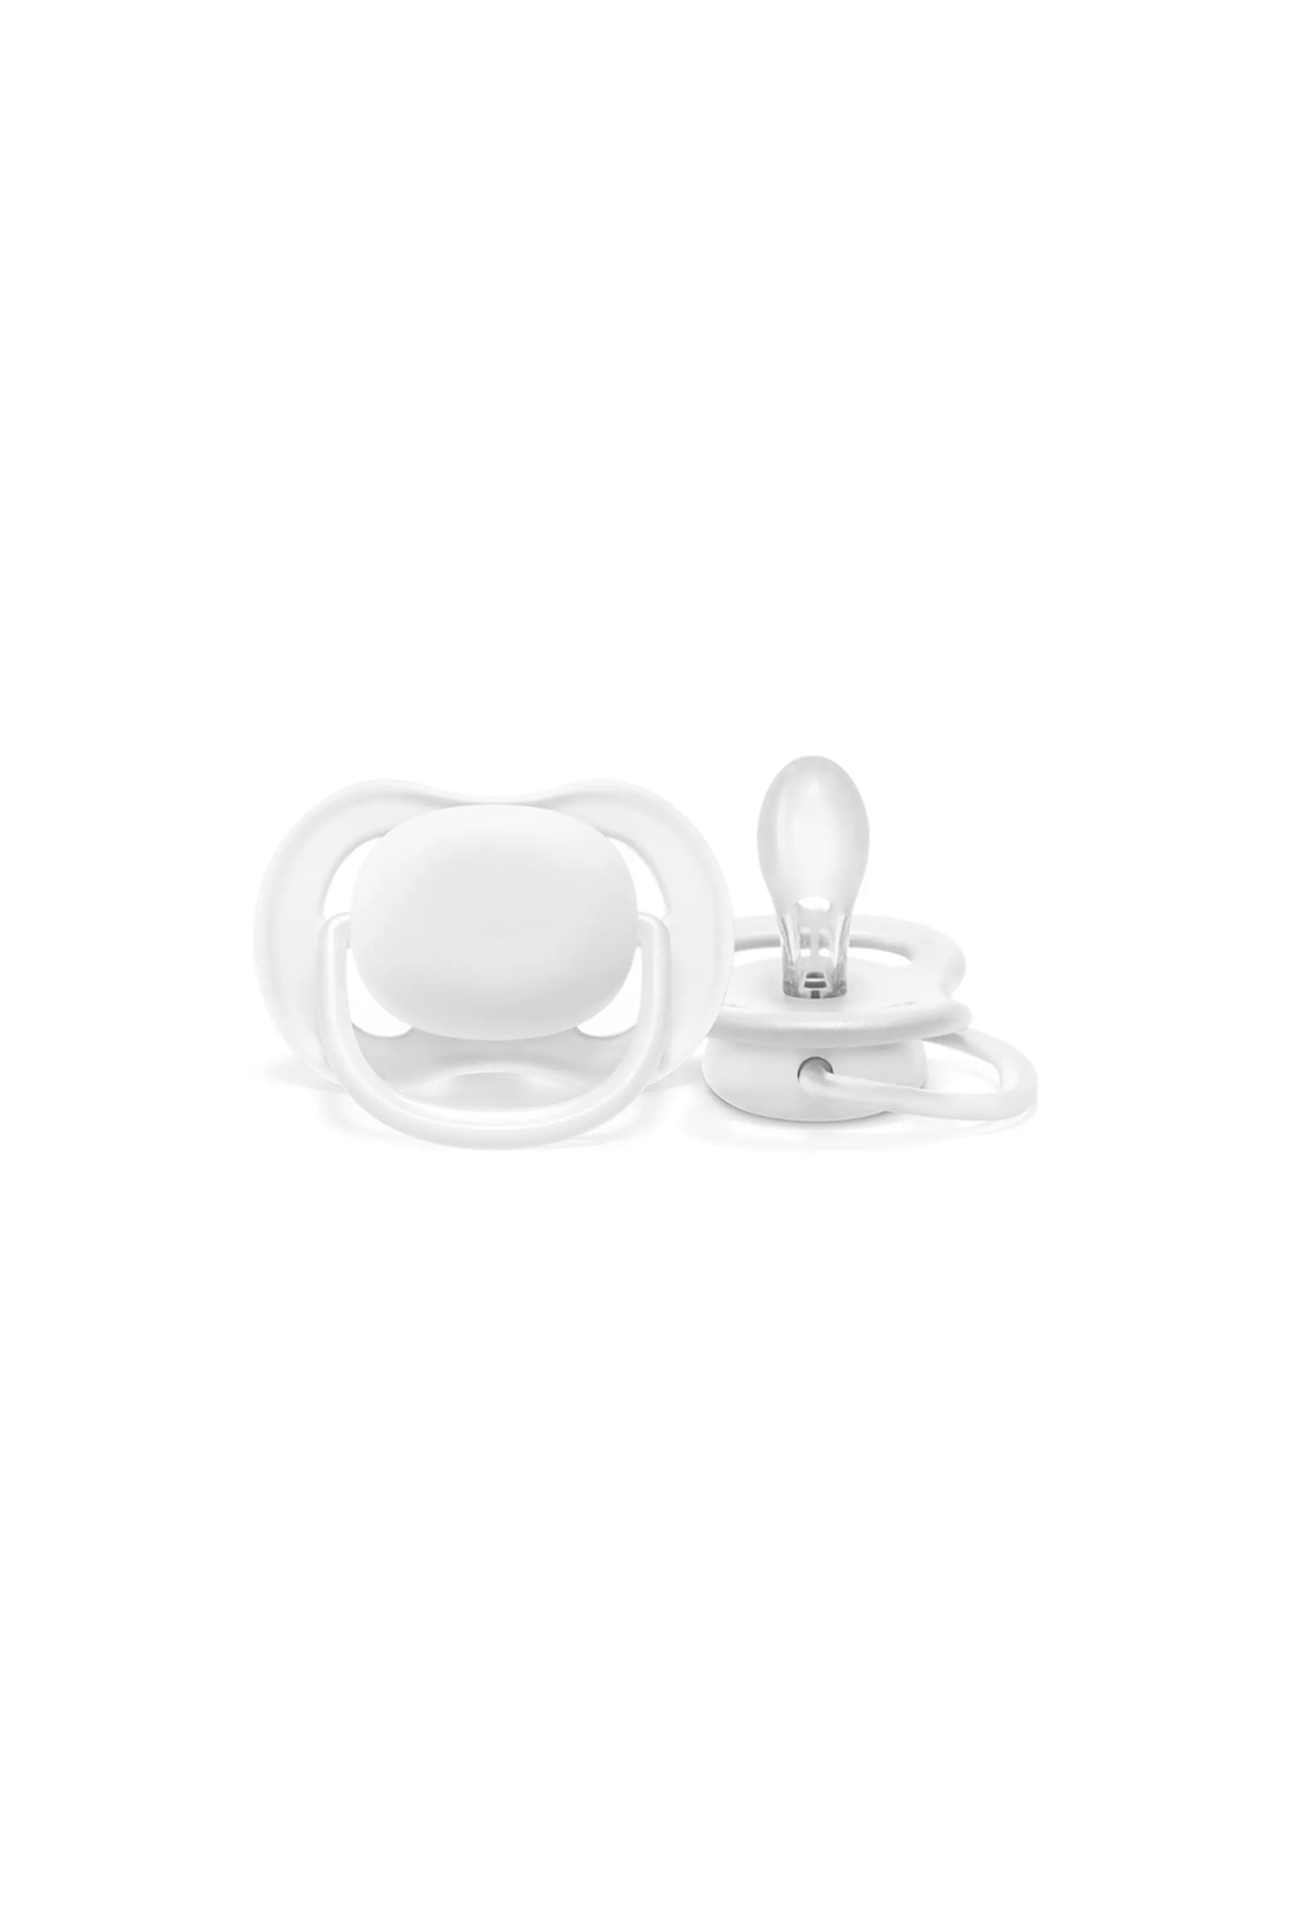 Avent-Chupete-Avent-Ultra-Air-Liso-Unisex-6-18-Meses-x-1-Unid-8710103984634_img1